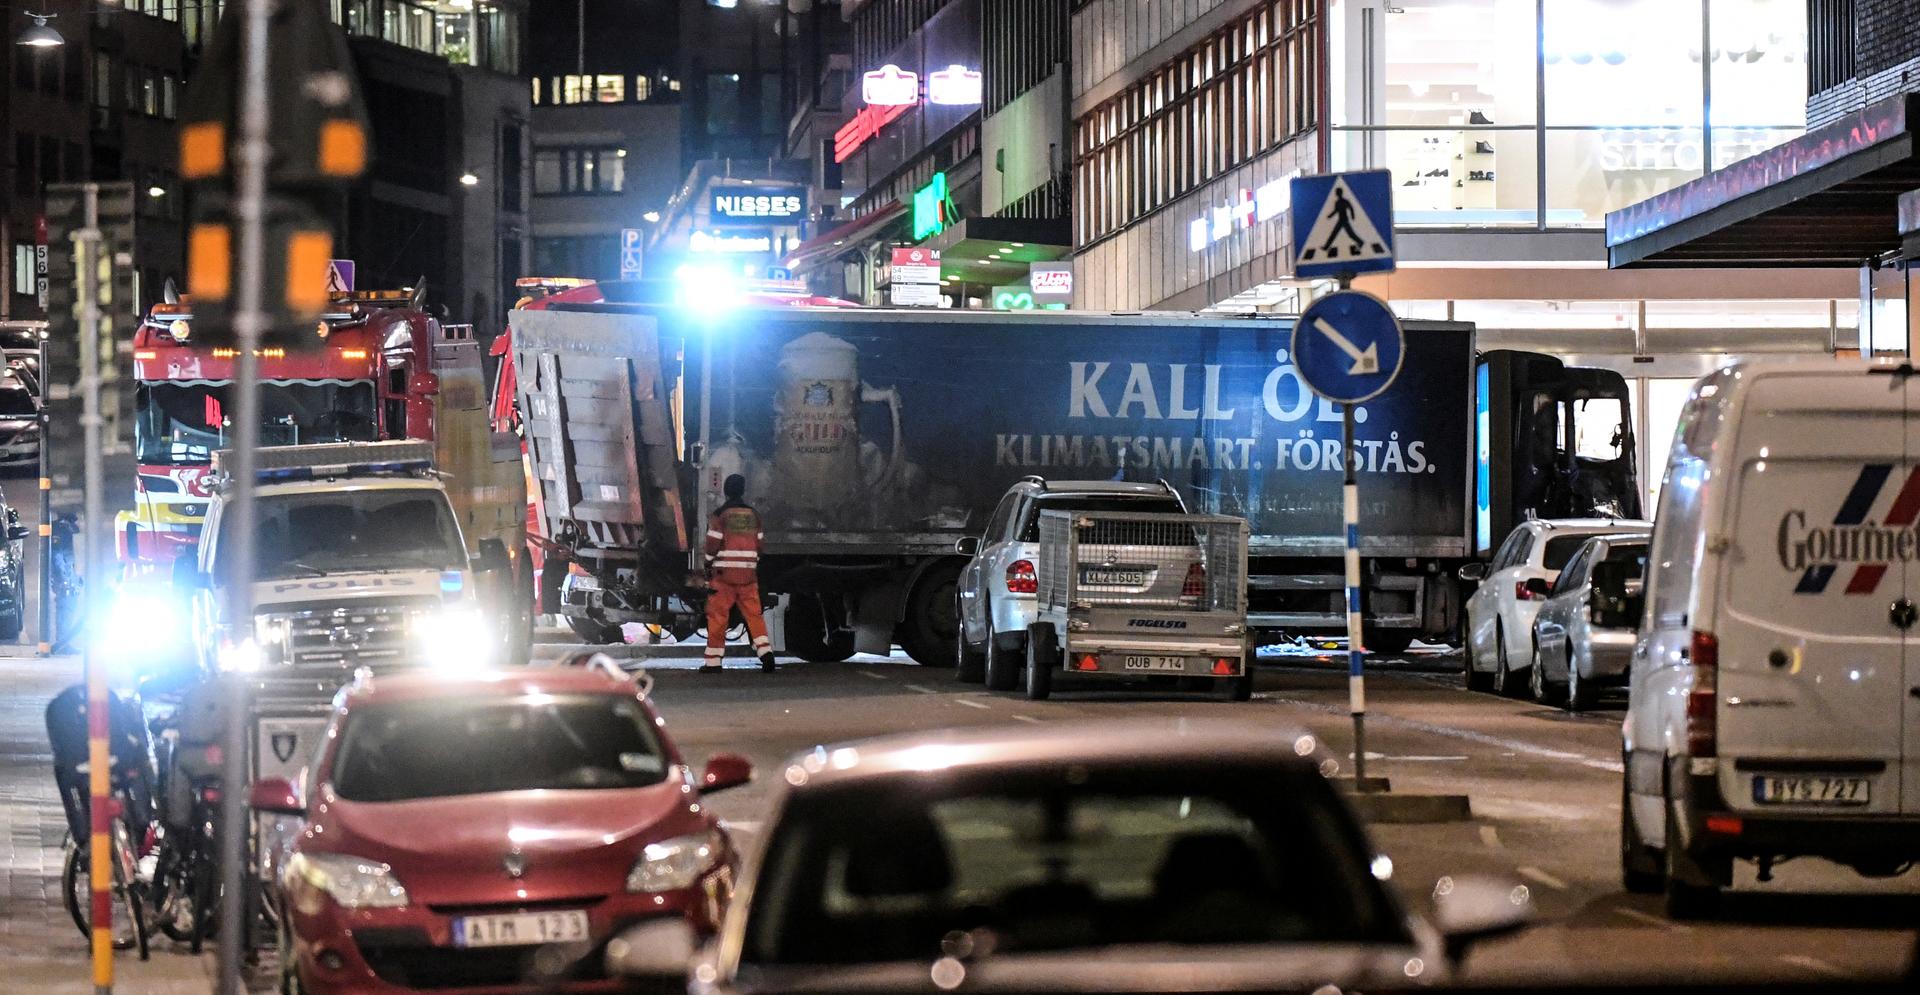 Tow trucks move the beer truck that crashed into the department store Ahlens after plowing down the Drottninggatan Street in central Stockholm, Sweden, April 7, 2017.